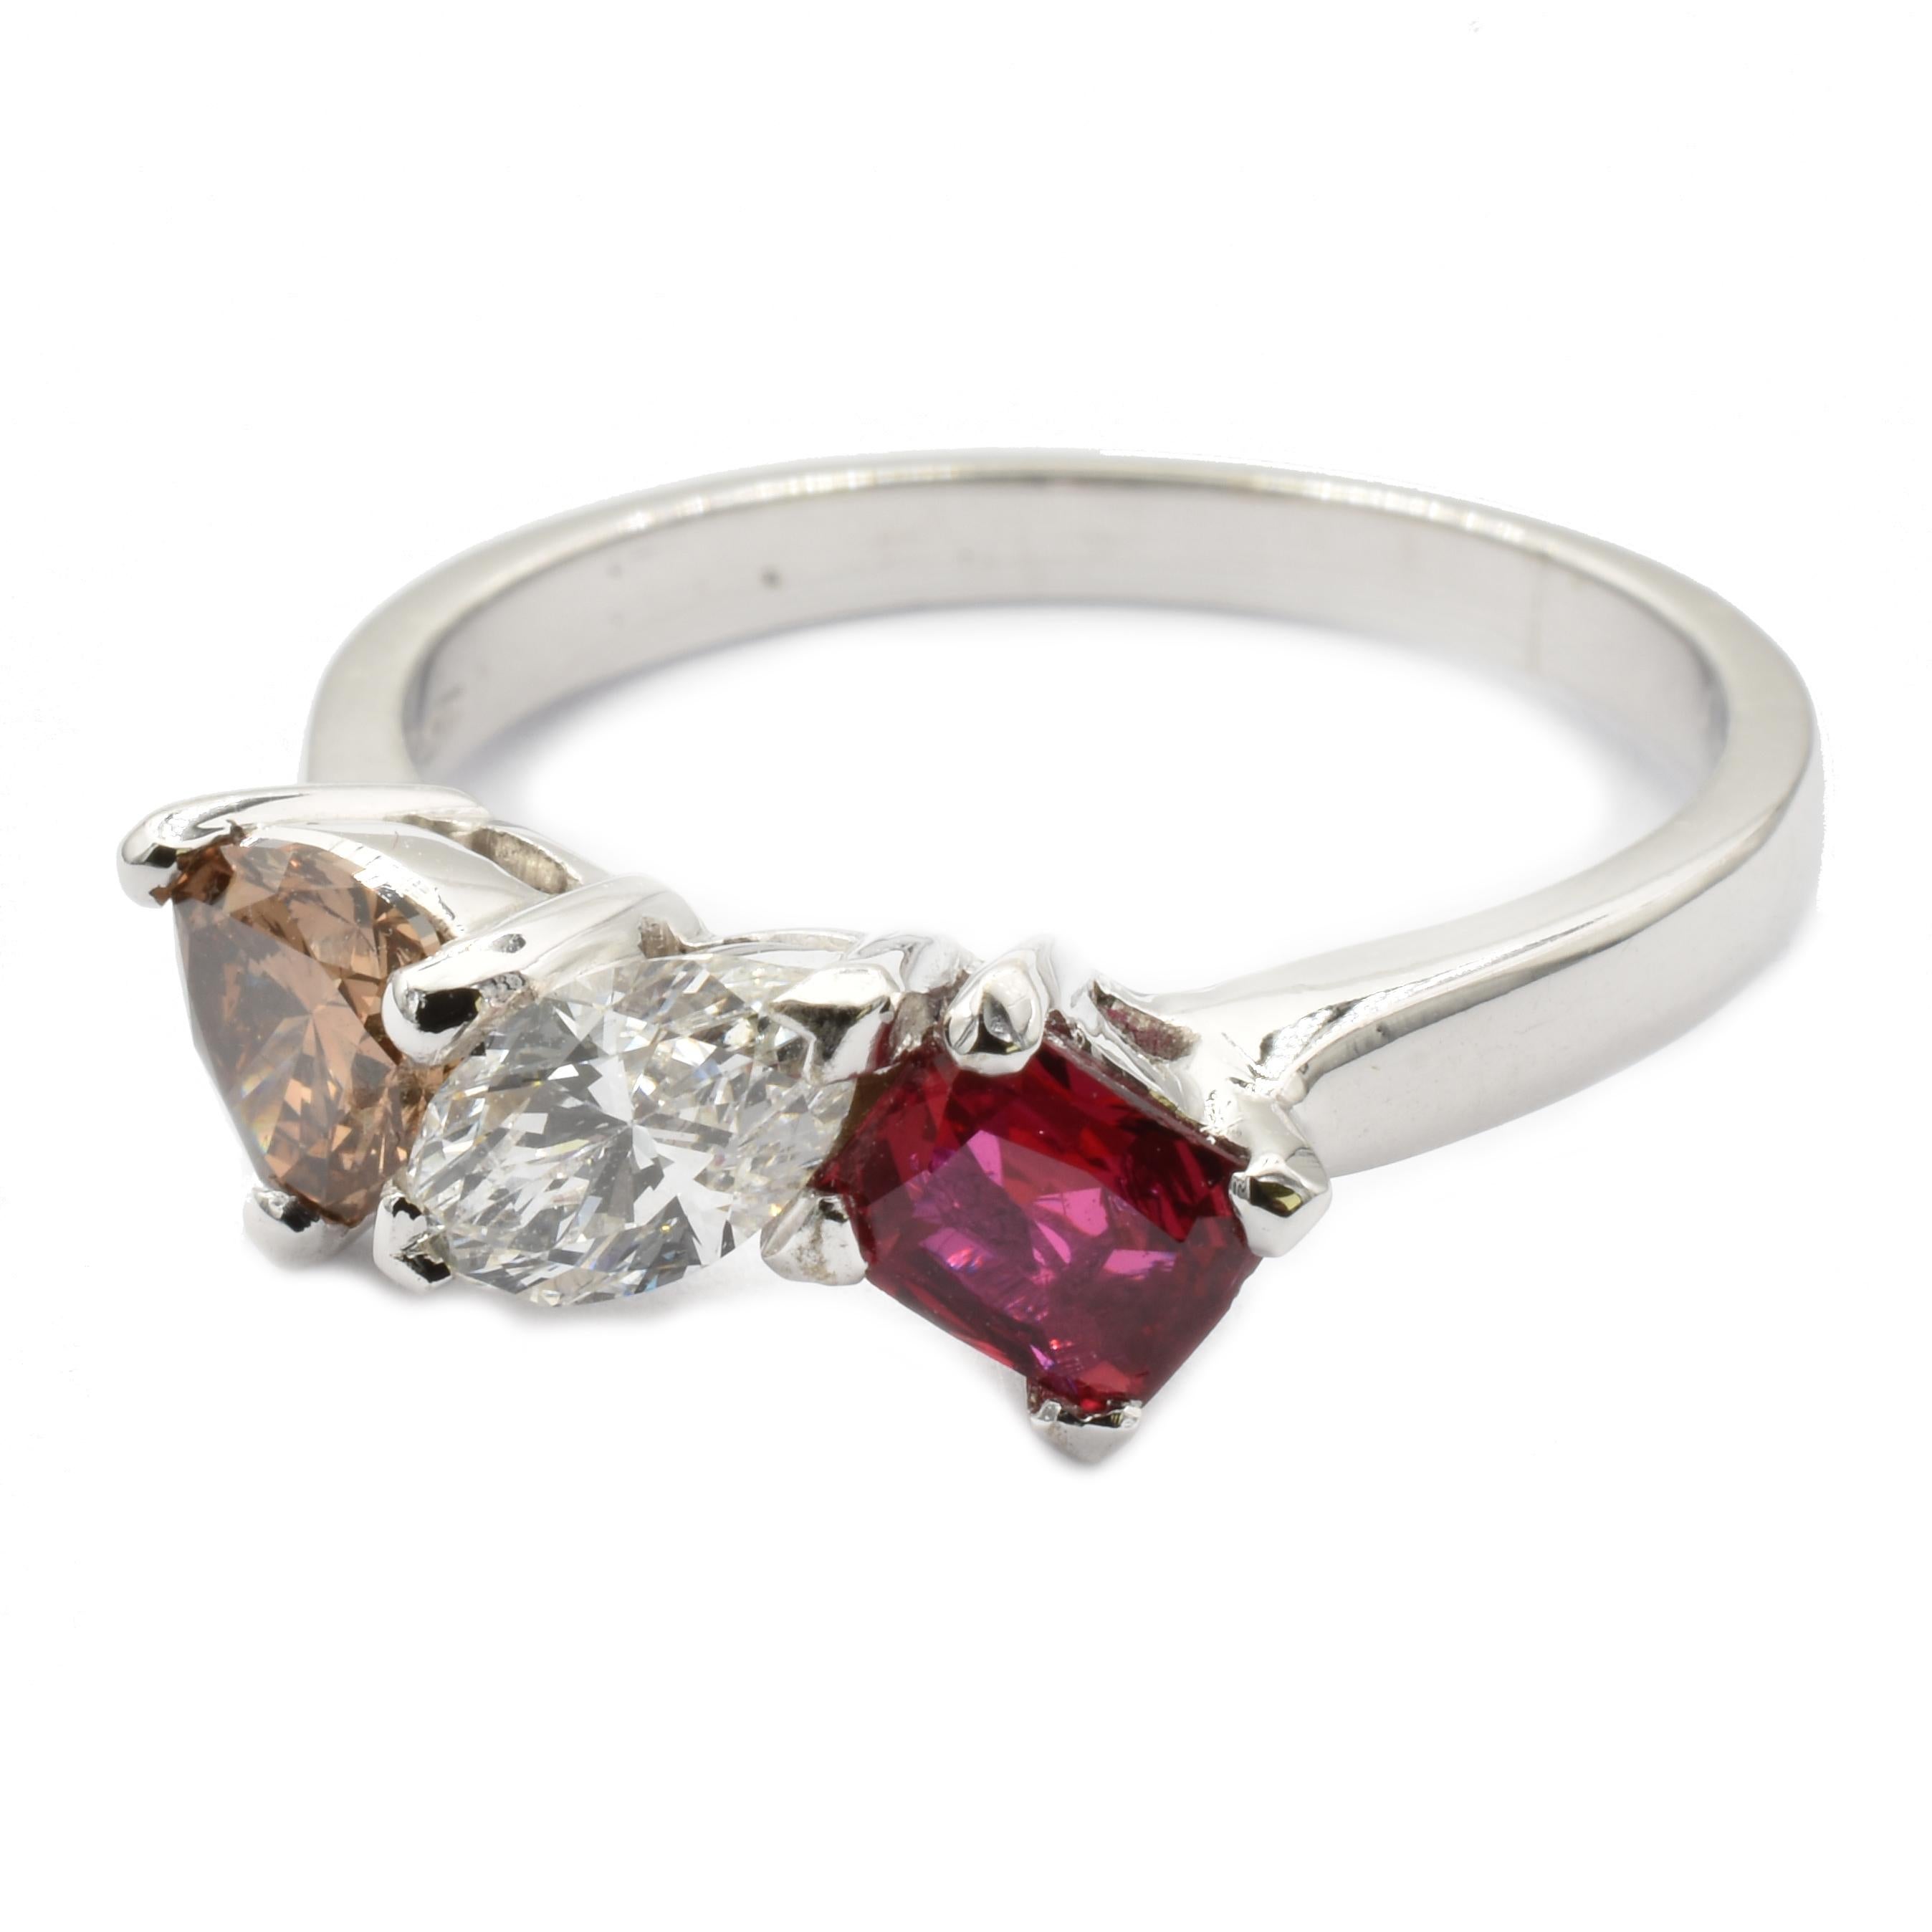 Gilberto Cassola 18Kt White Gold Three Stone Ring with a Marquise White Diamond, a Trillion Cut Dark Champagne Diamond and an Octagonal Cut Deep Red Ruby. 
G Color Vs Clarity Marquise Cut Diamond ct 0.40
Fancy Color Dark Champagne Trillion Diamond